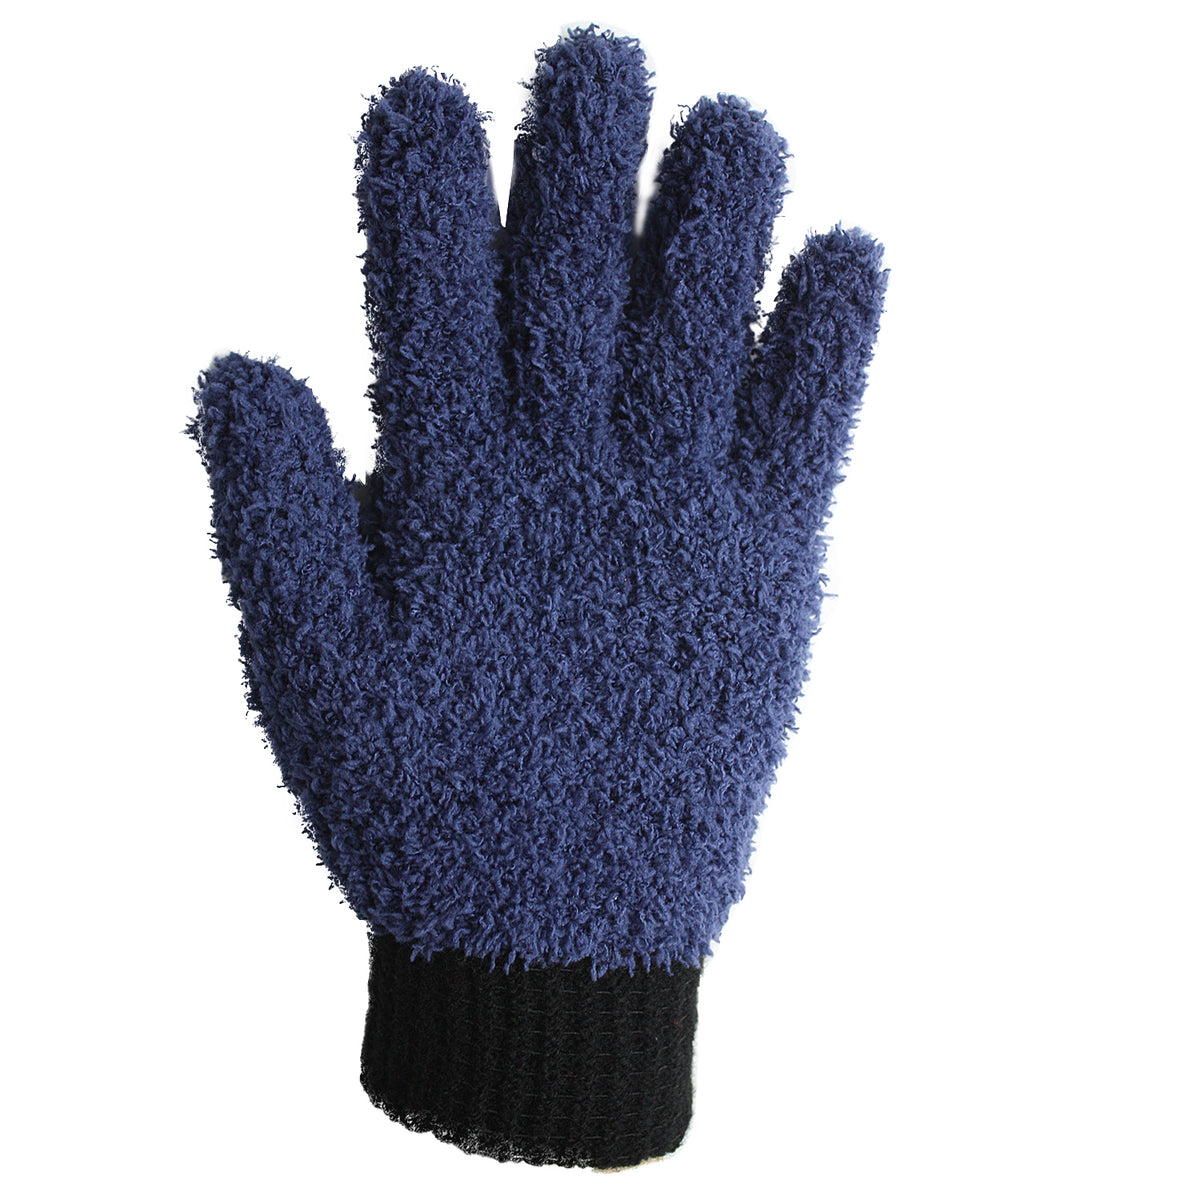 MIG4U Microfiber Dusting Gloves House Cleaning Glove for Blinds, Windows, Baseboard, Furniture and Car, Reusable Lint-Free Multicolor 4prs L/XL